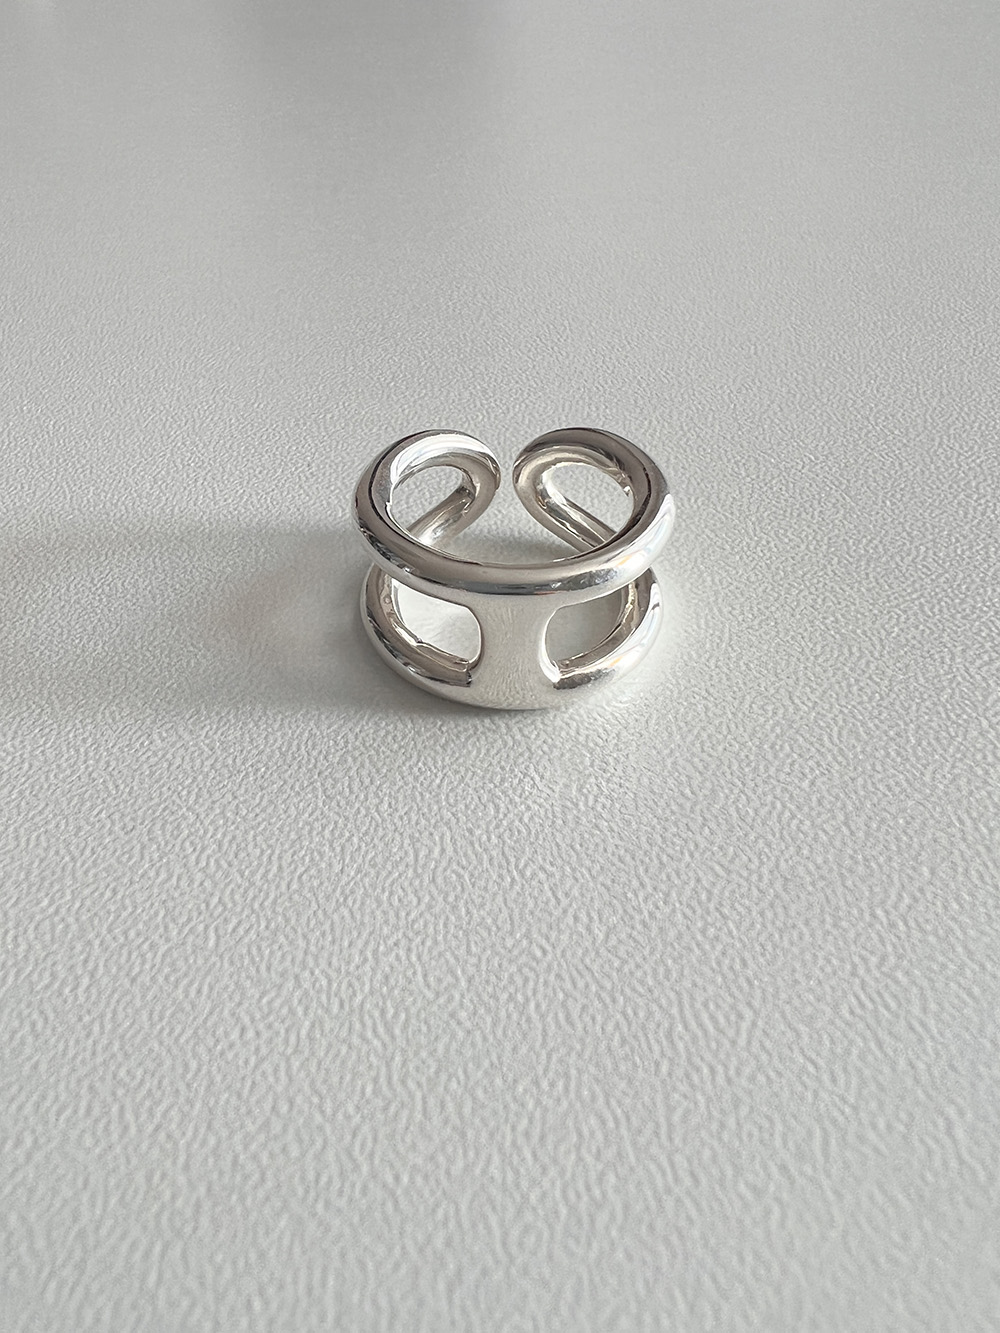 [92.5 silver] osmo ring